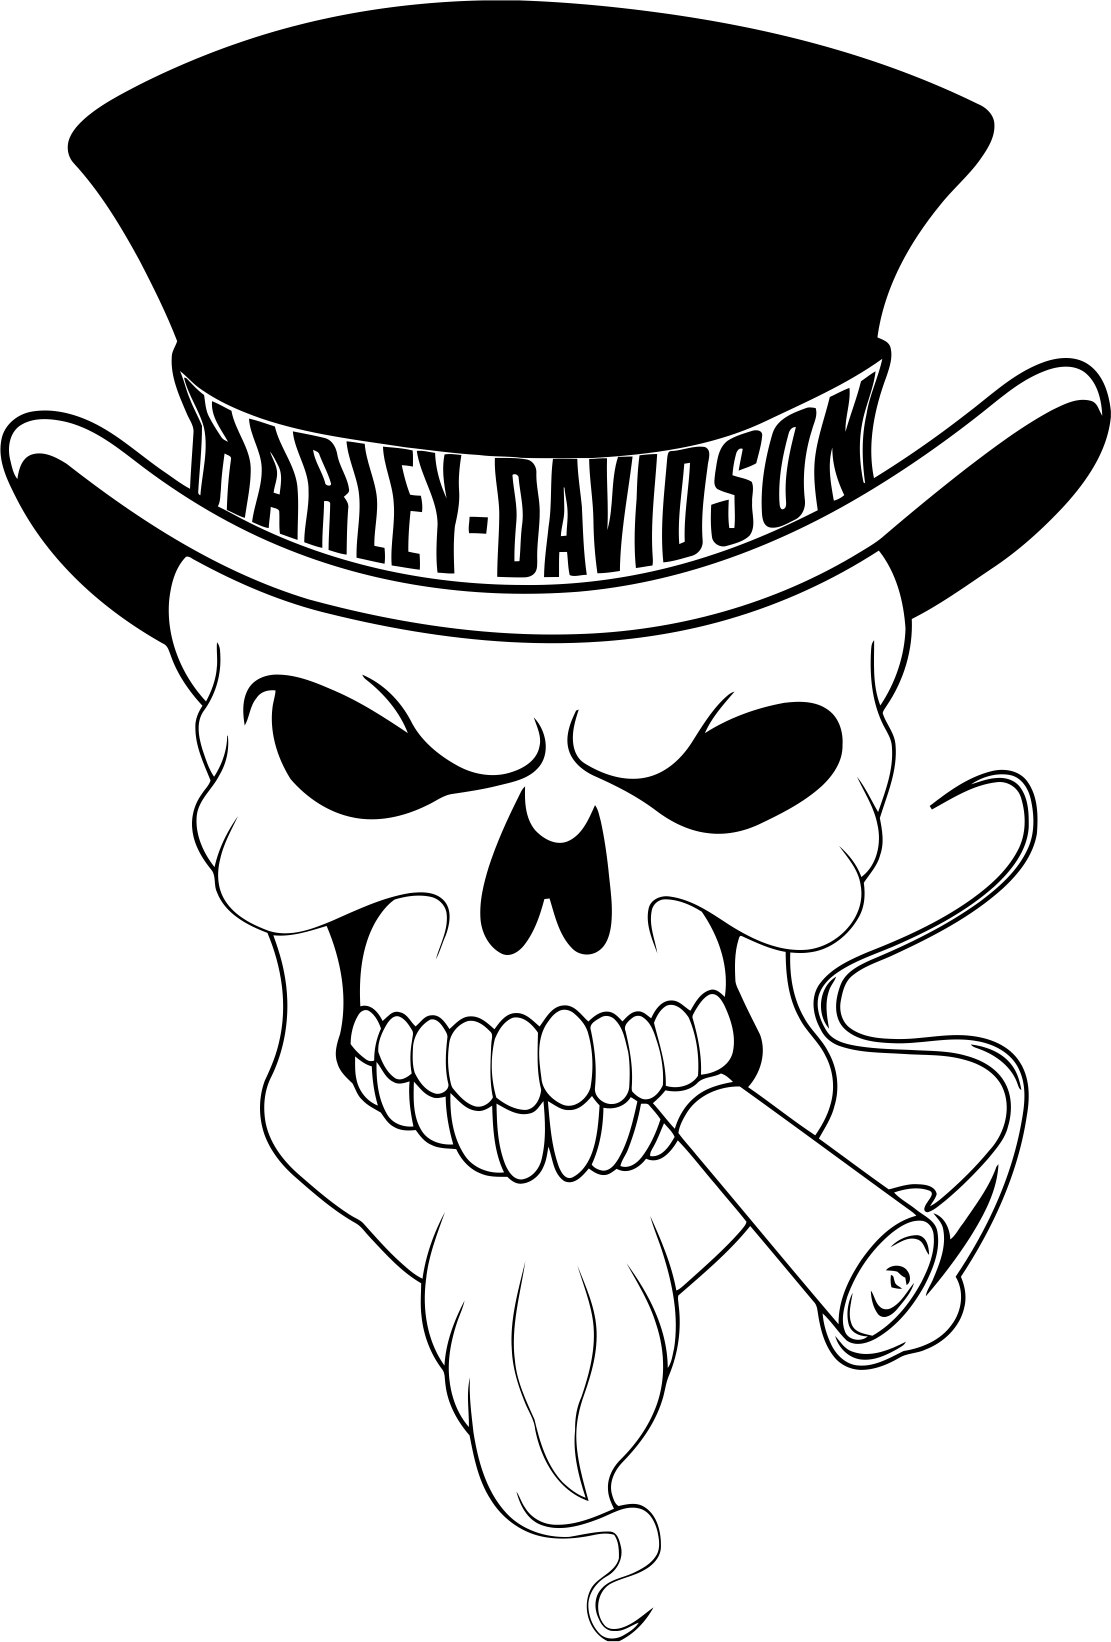 Smoking Skull Silhouette Vector Free CDR File